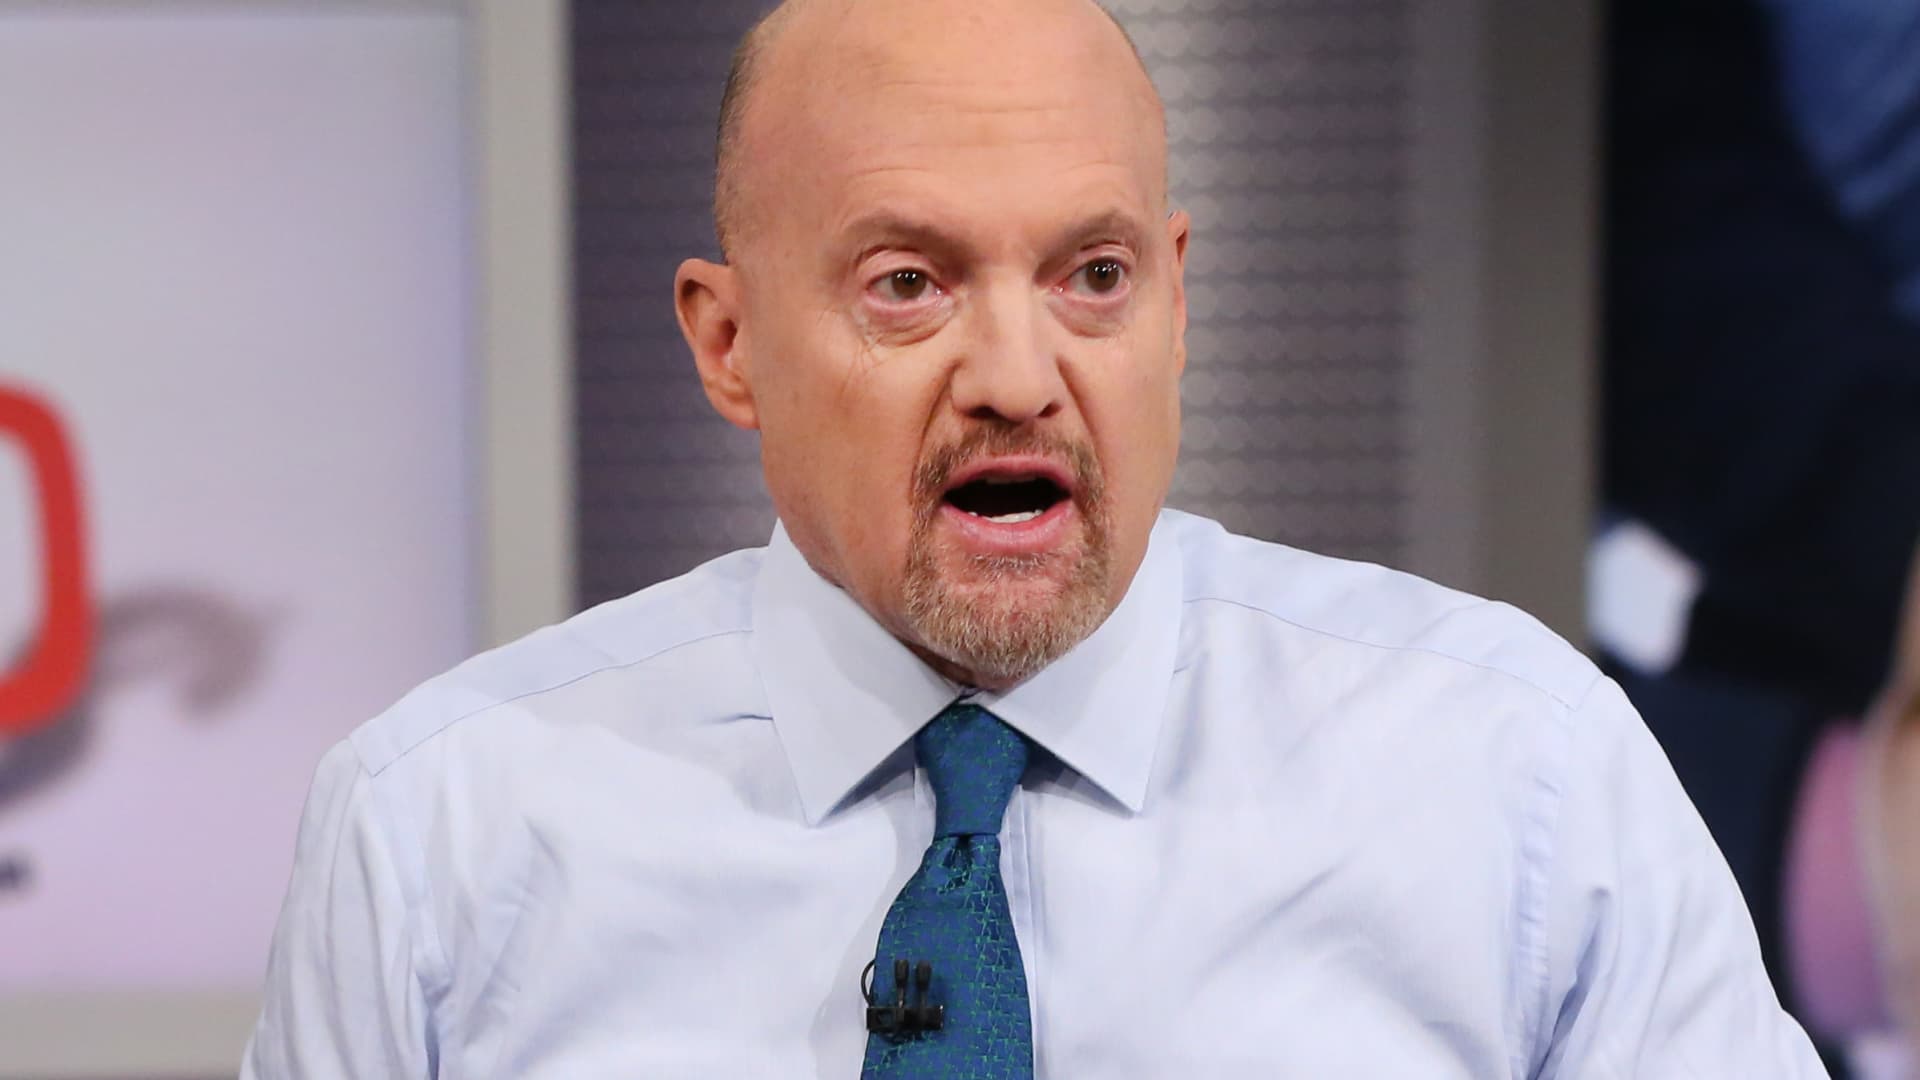 Wait for the market to decline more before putting cash to work, Jim Cramer says